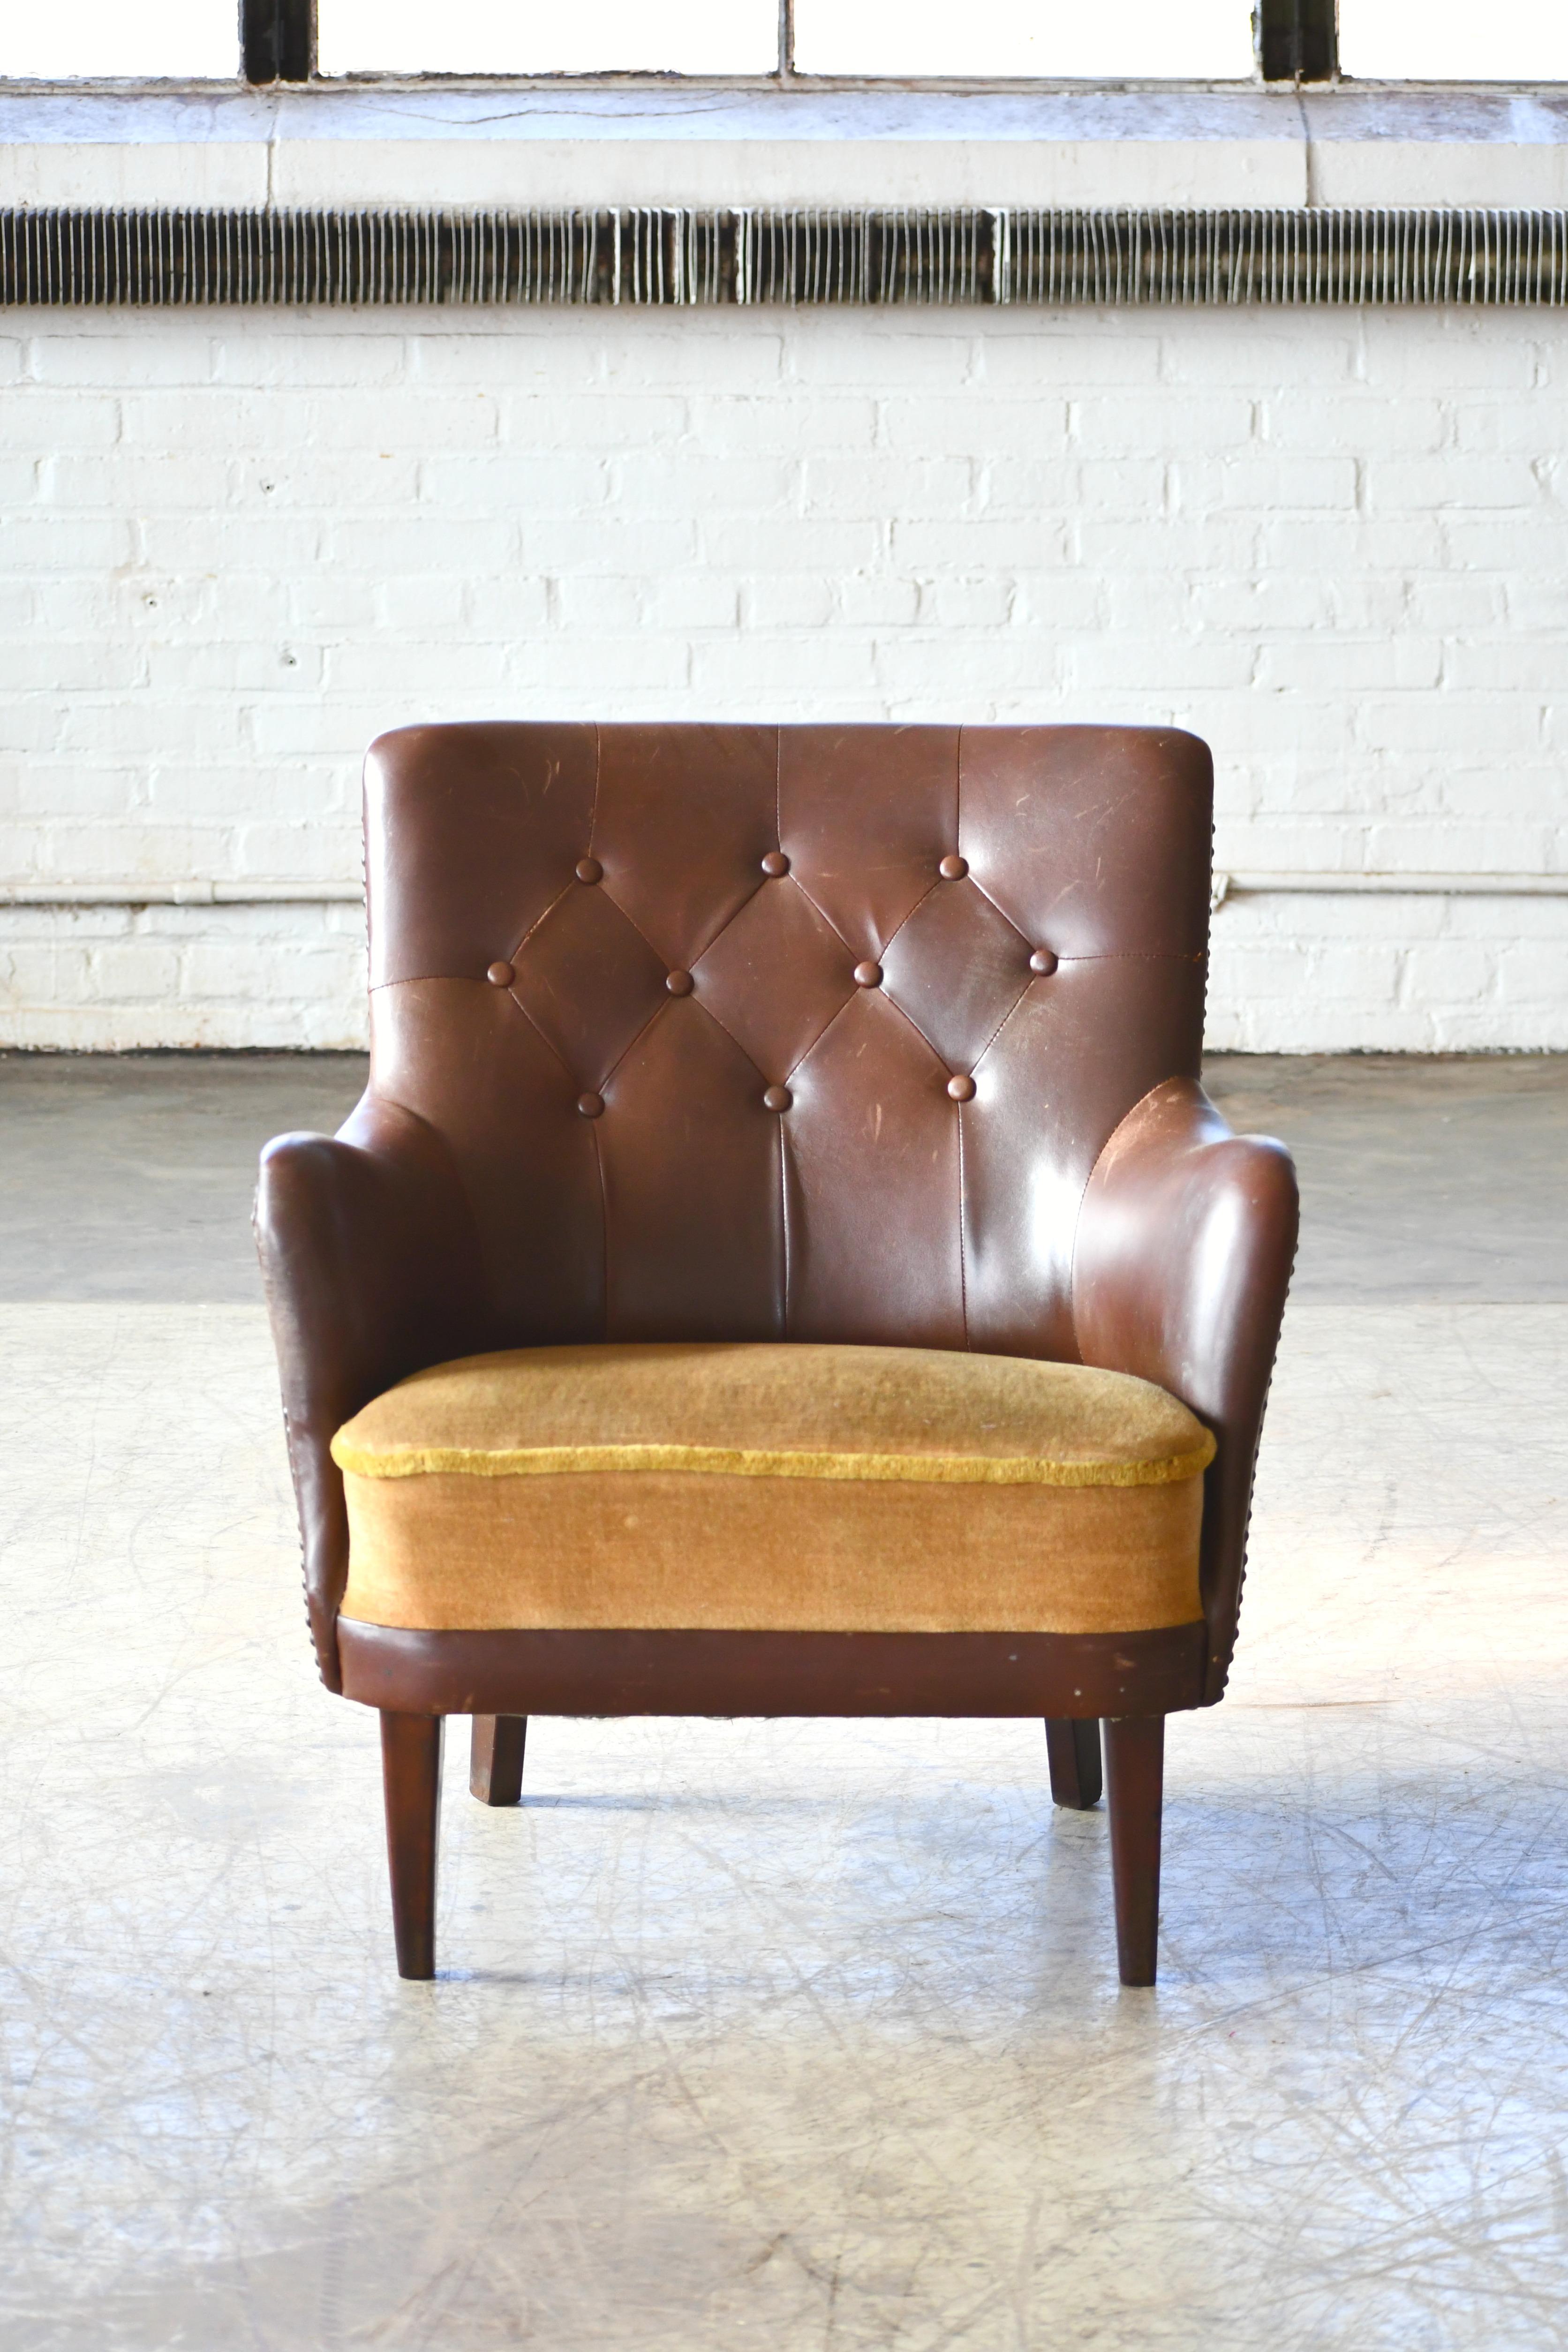 Charming and elegant small Danish easy chair in the style of Frits Henningsen in tufted chocolate colored leather with green velvet seat. Leather is in good condition with a nice patina and natural age wear all combining to a nice worn look. Raised